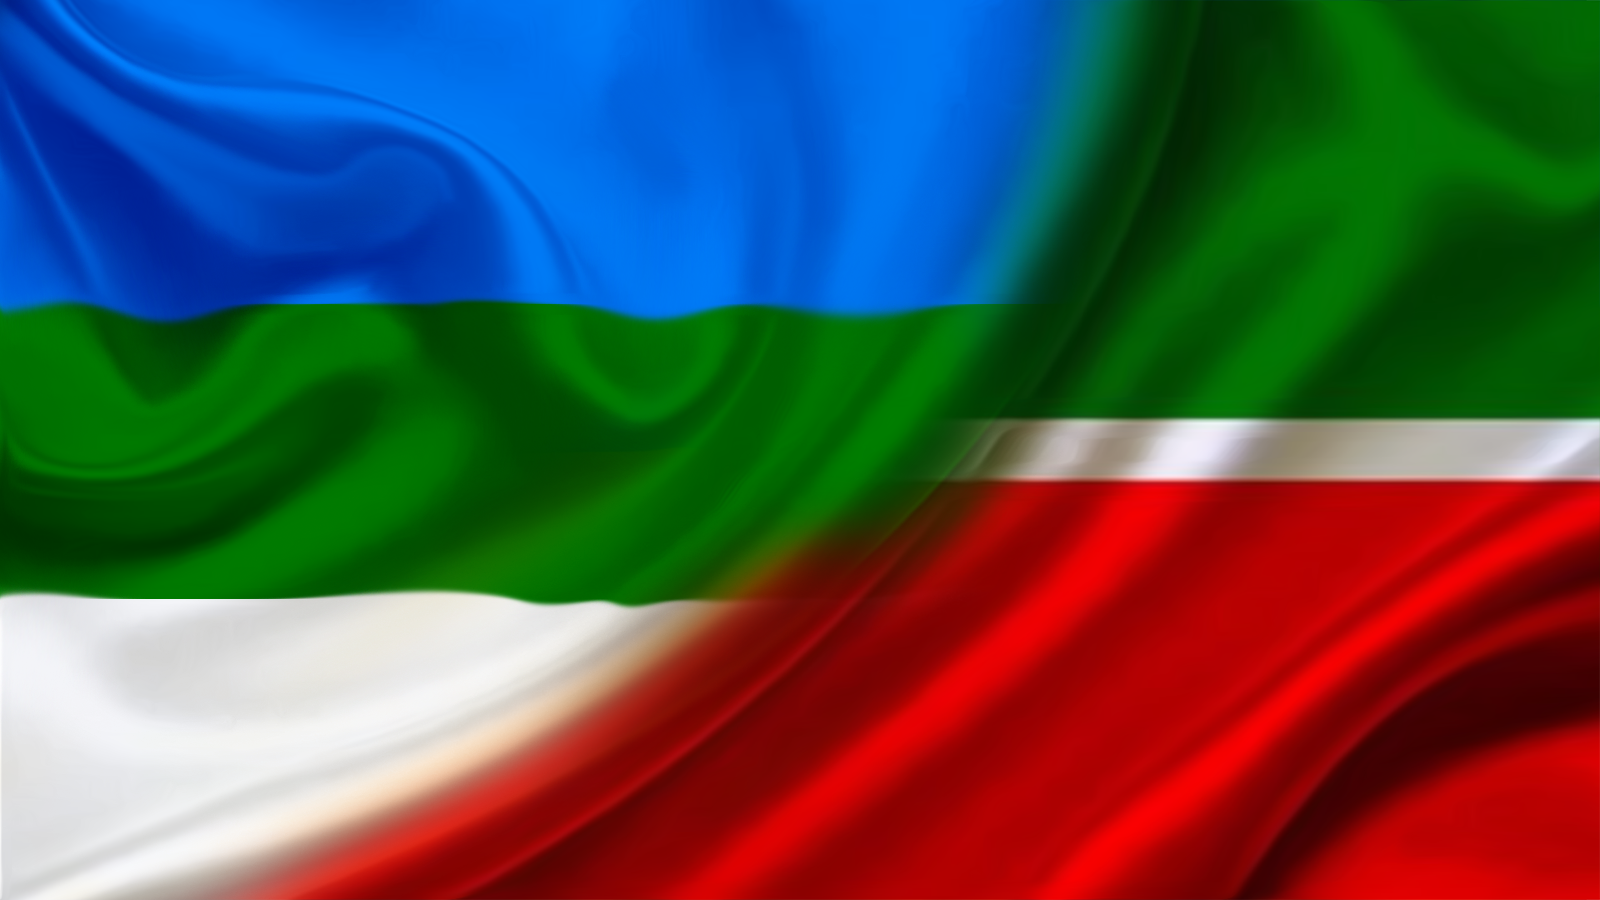 On April 14, the Government of Independent Tatarstan and the Committee of the Bashkir National Movement Abroad signed a joint Declaration on Mutual Recognition and Cooperation